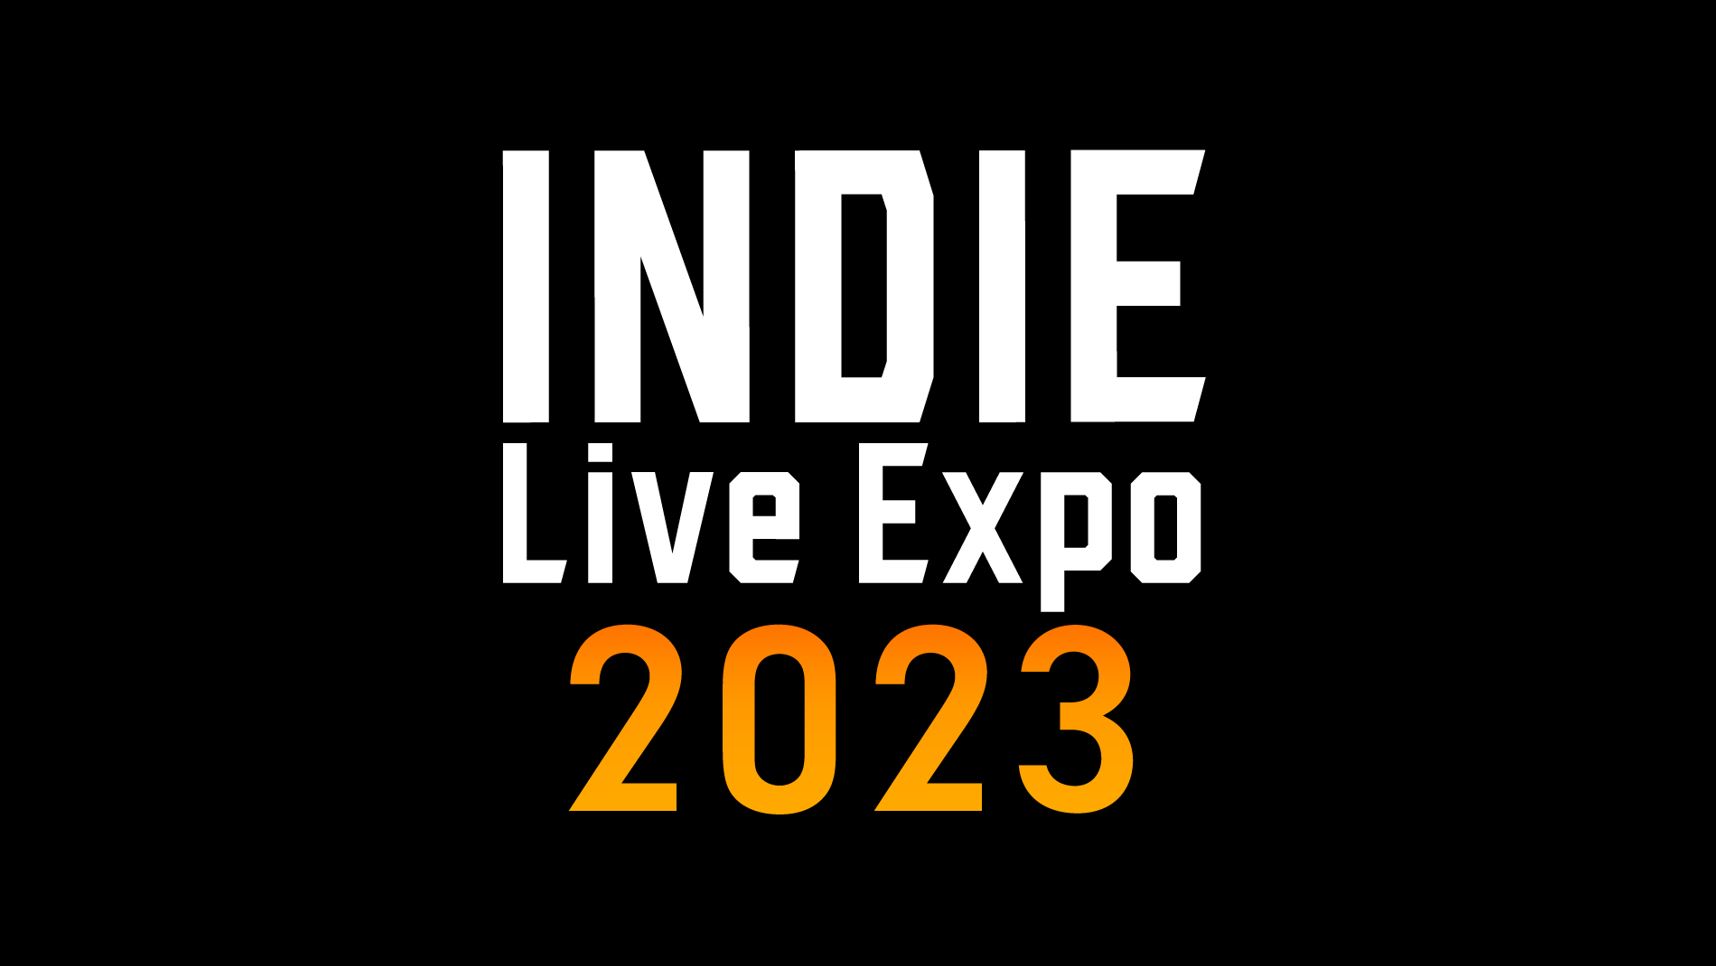 Key art for Indie Live Expo 2023